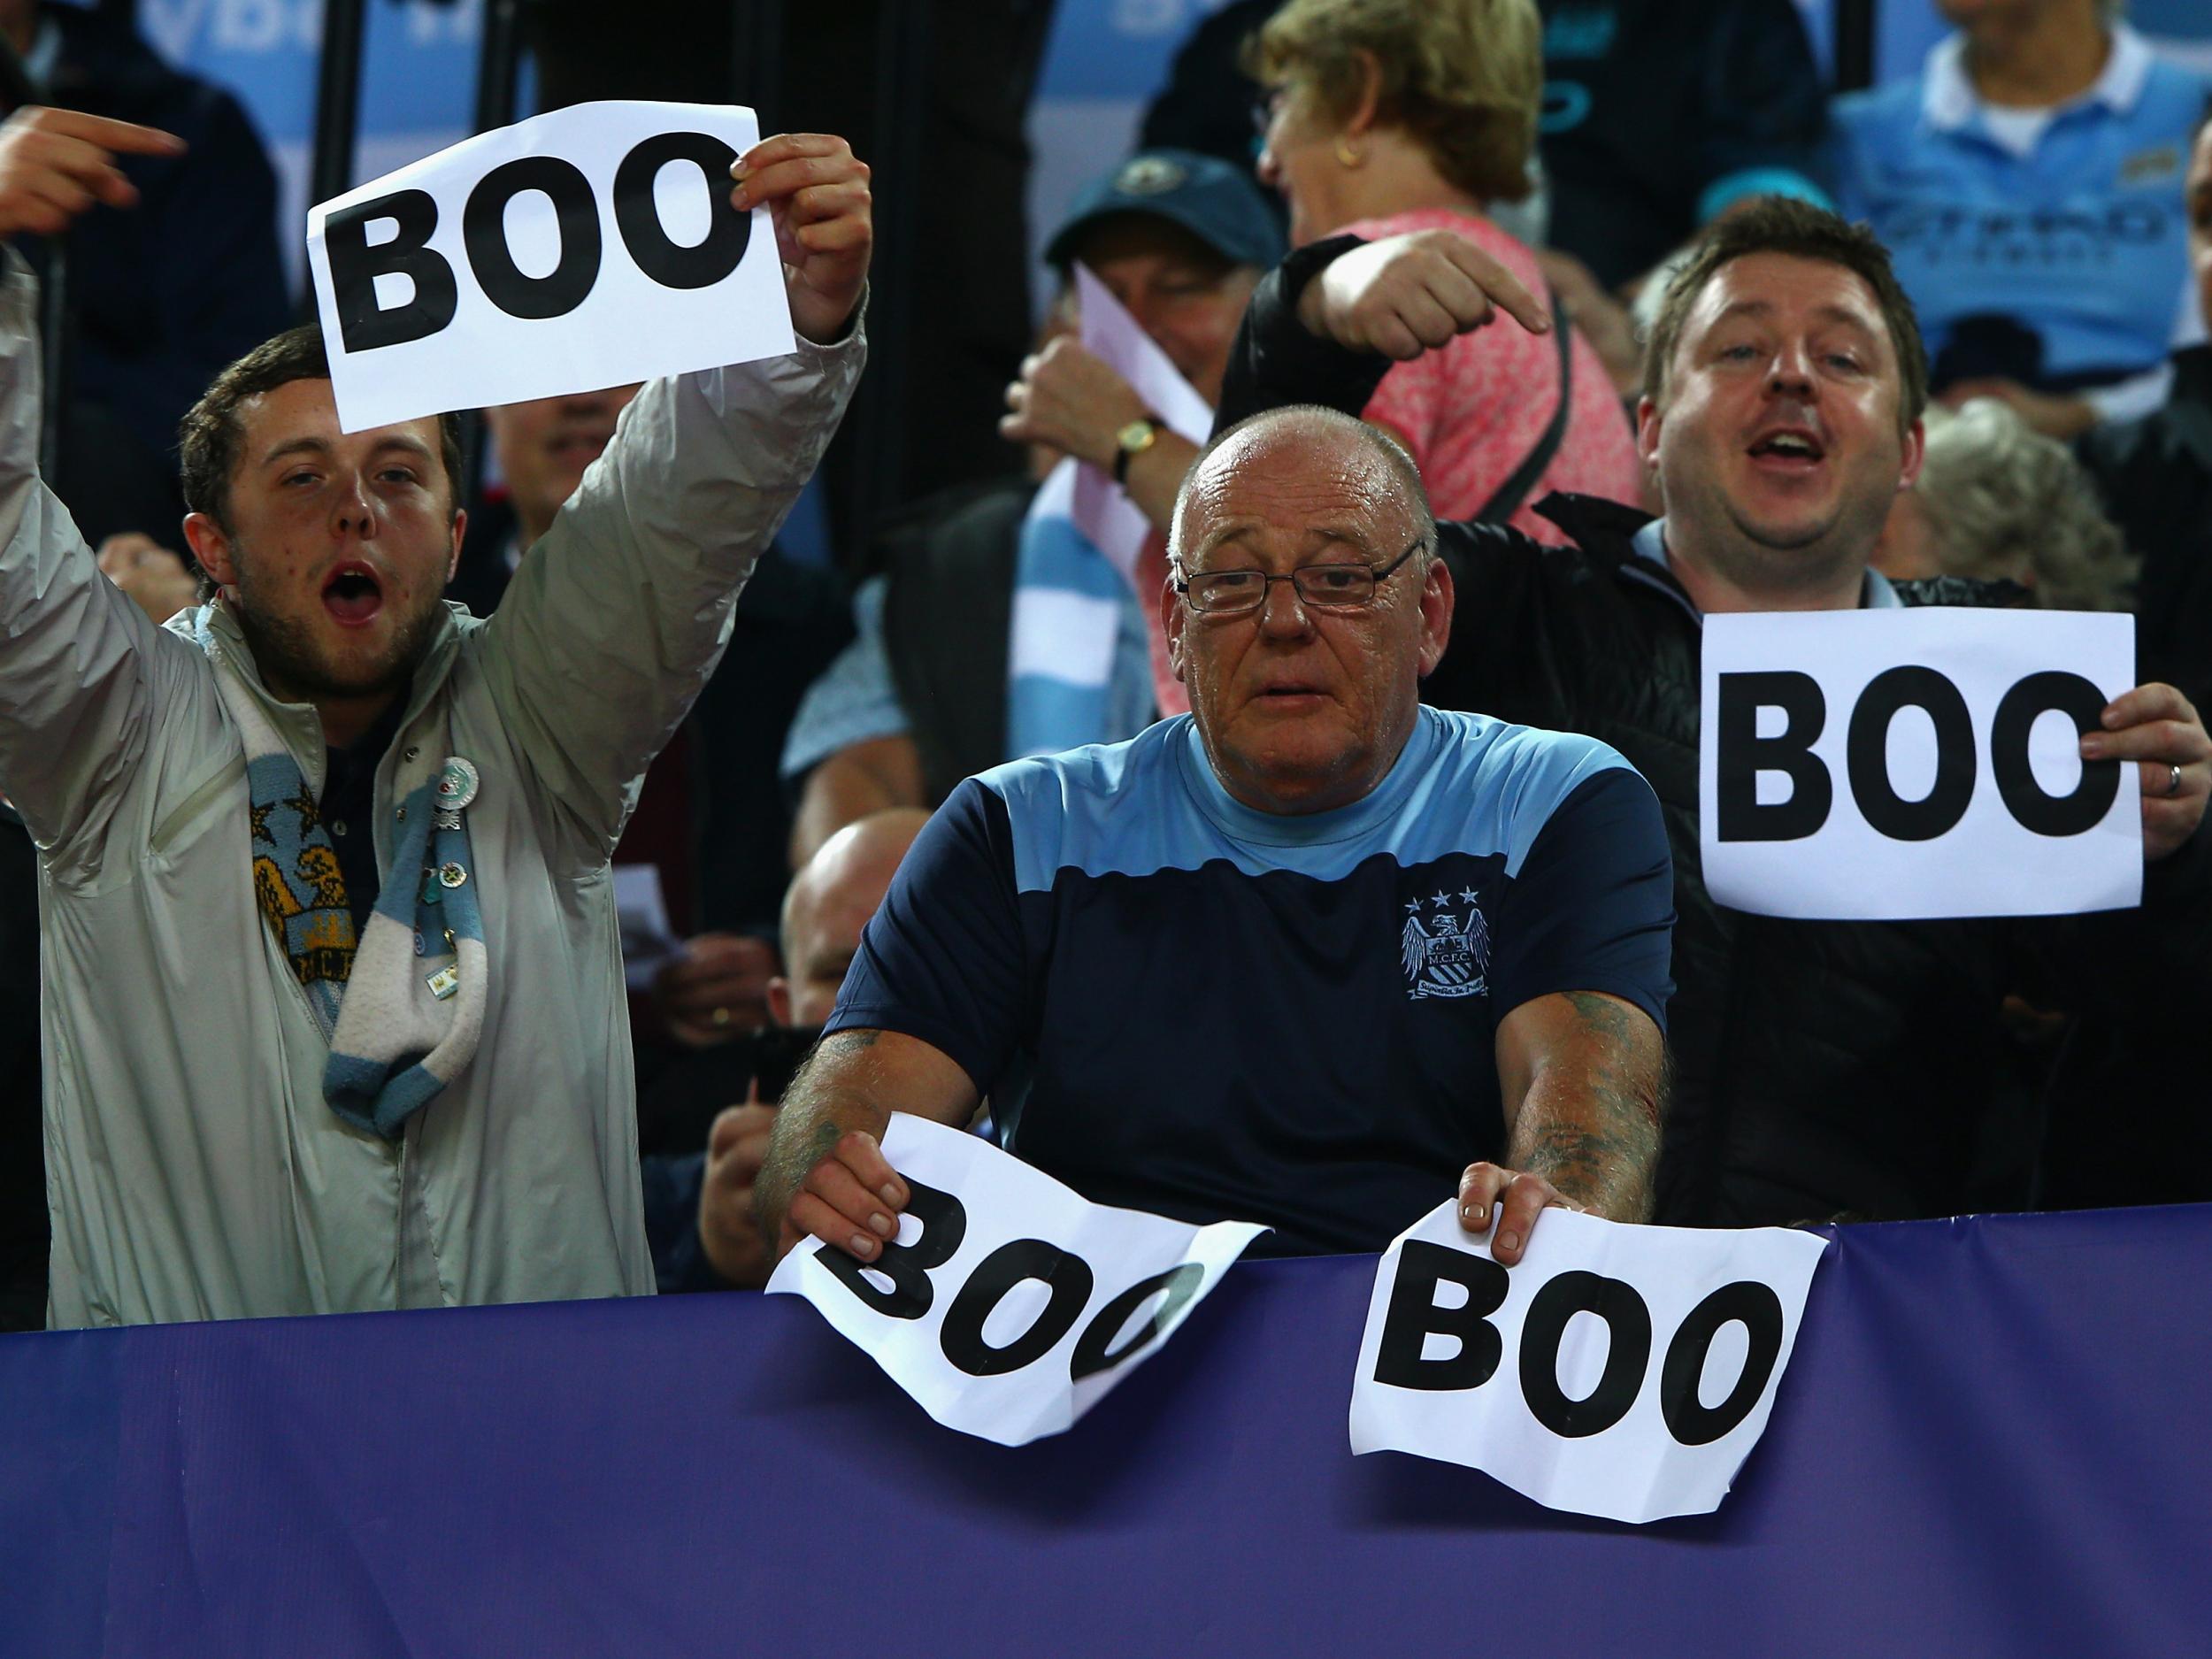 Manchester City fans hold up 'boo' signs ahead of a Champions League clash against Sevilla